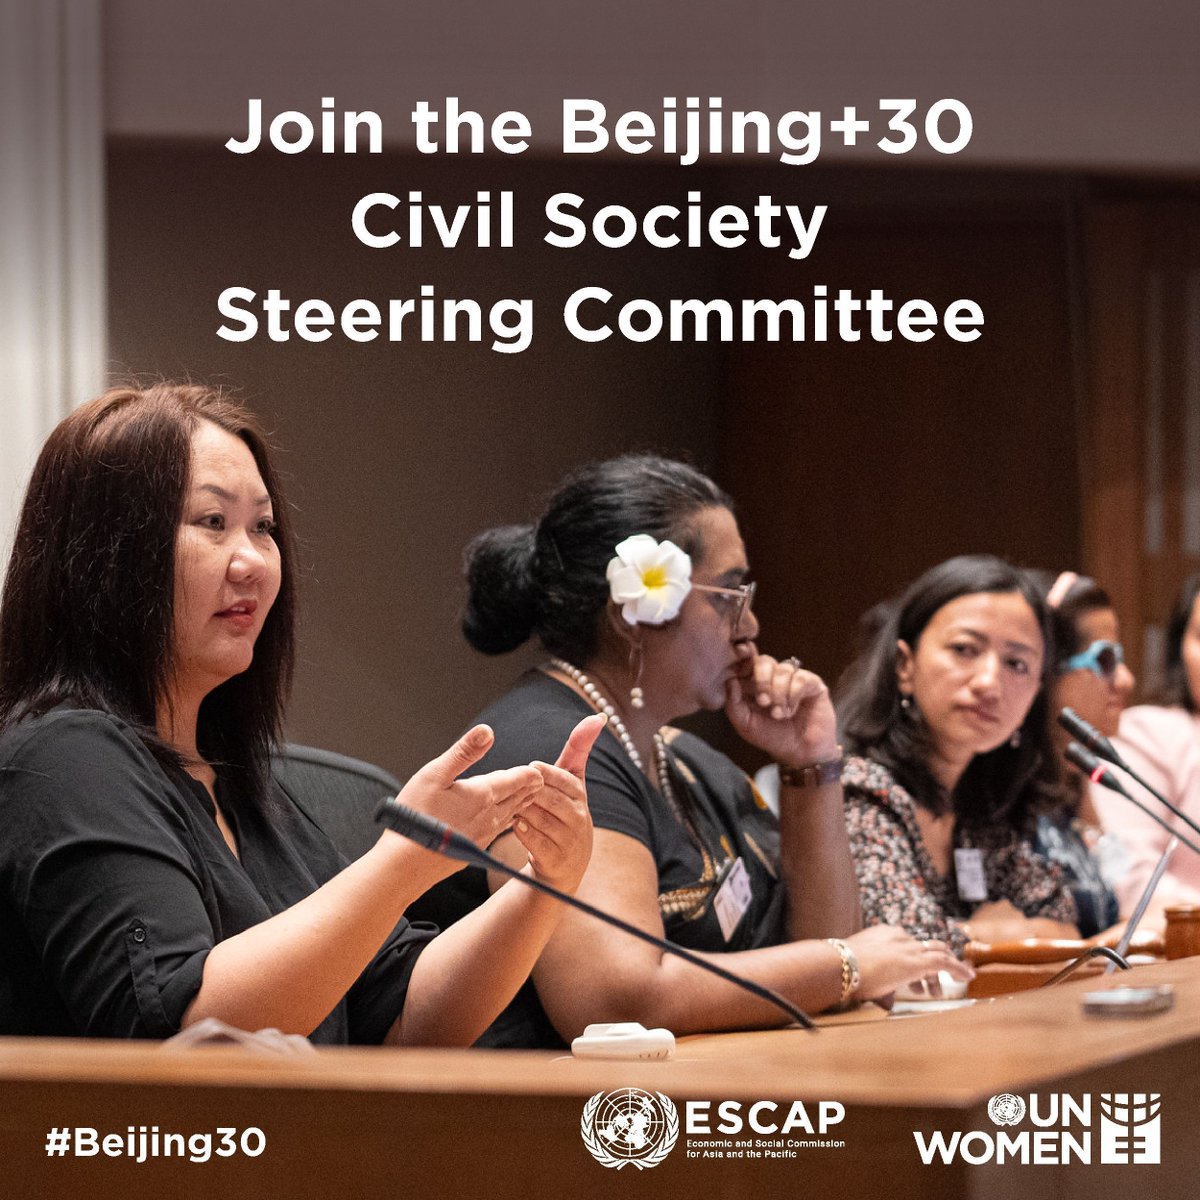 The clock is ticking... There are just 2 days left to apply to join the #Beijing30 CSO Steering Committee for #AsiaPacific! 👩 @unwomenasia ✍️ Apply by midnight 12 May: buff.ly/3Uyix7P